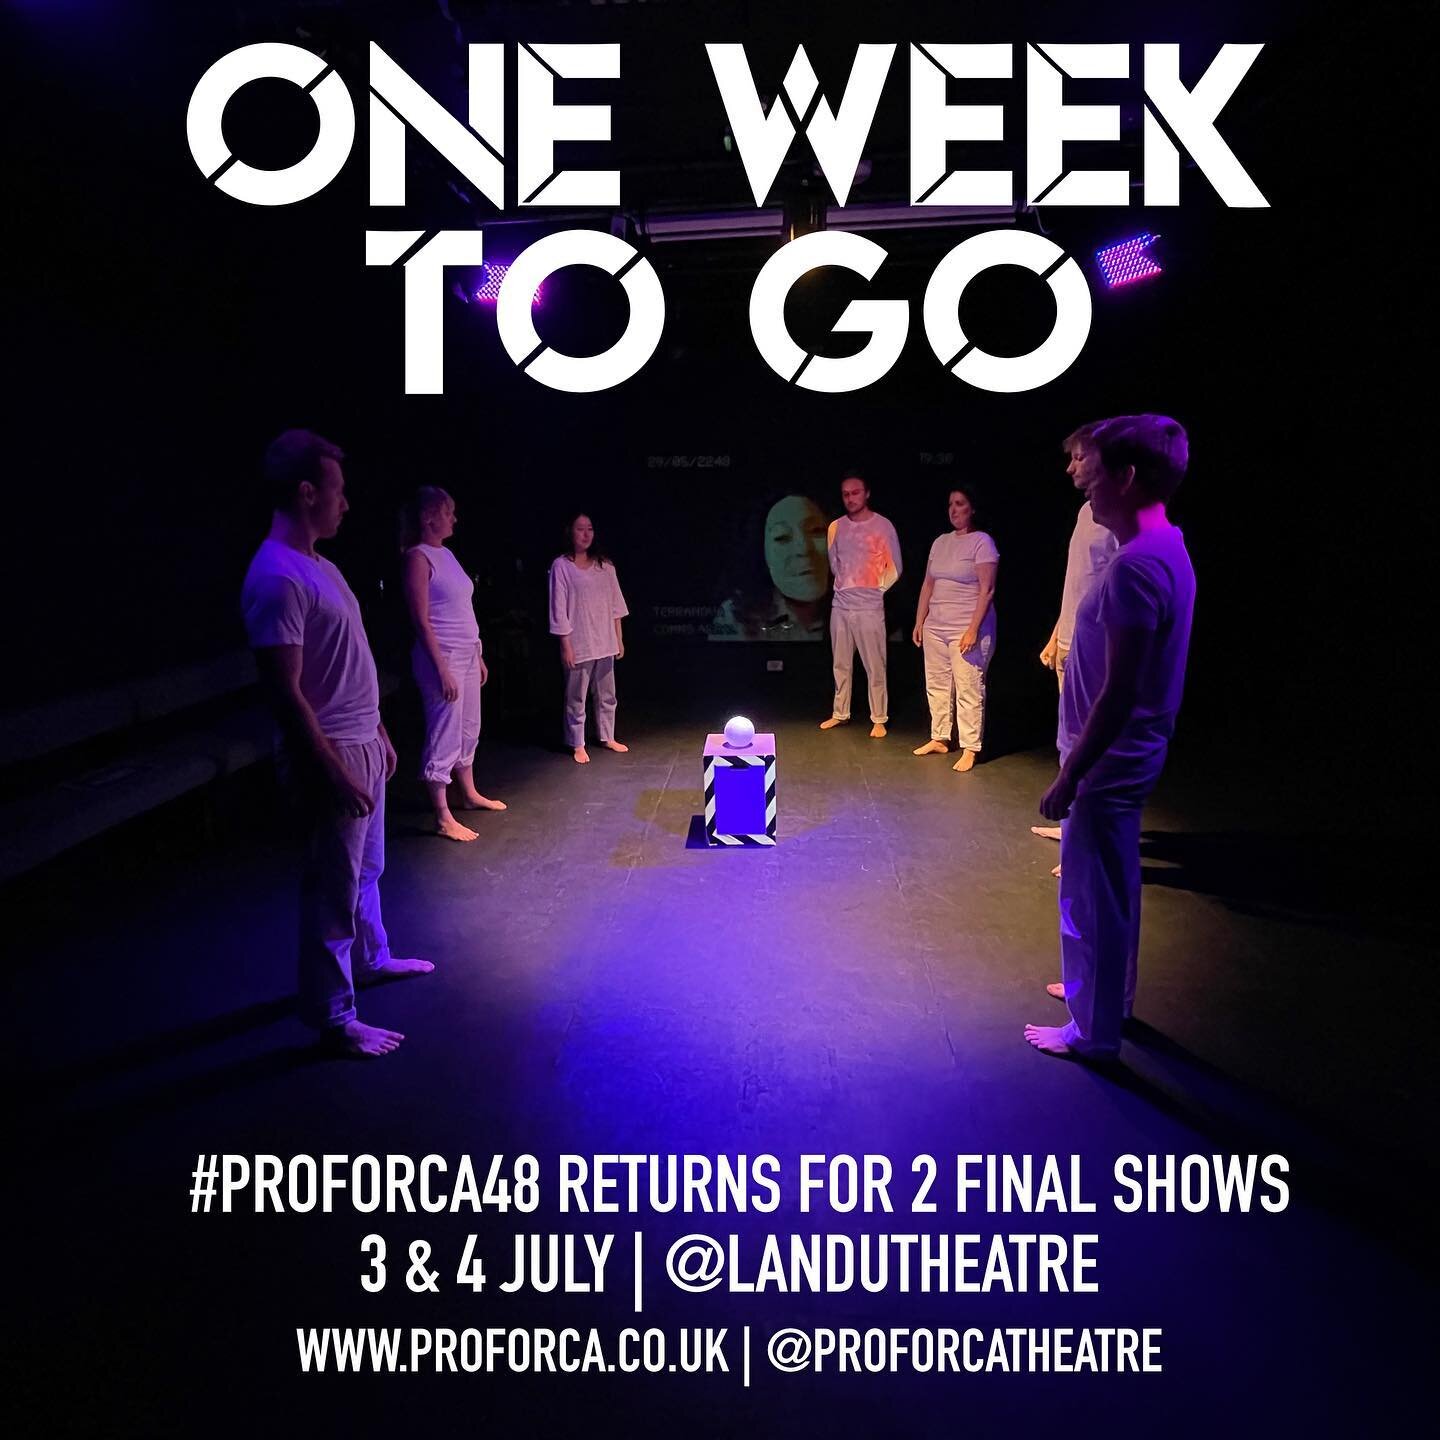 🔮 ONE WEEK TO GO. We had such a blast making #Proforca48 we&rsquo;re back to do it all over again. Catch our swashbuckling, sea shantying, Bobby Dazzling romp through time and space to find the world&rsquo;s most important person next week for two f